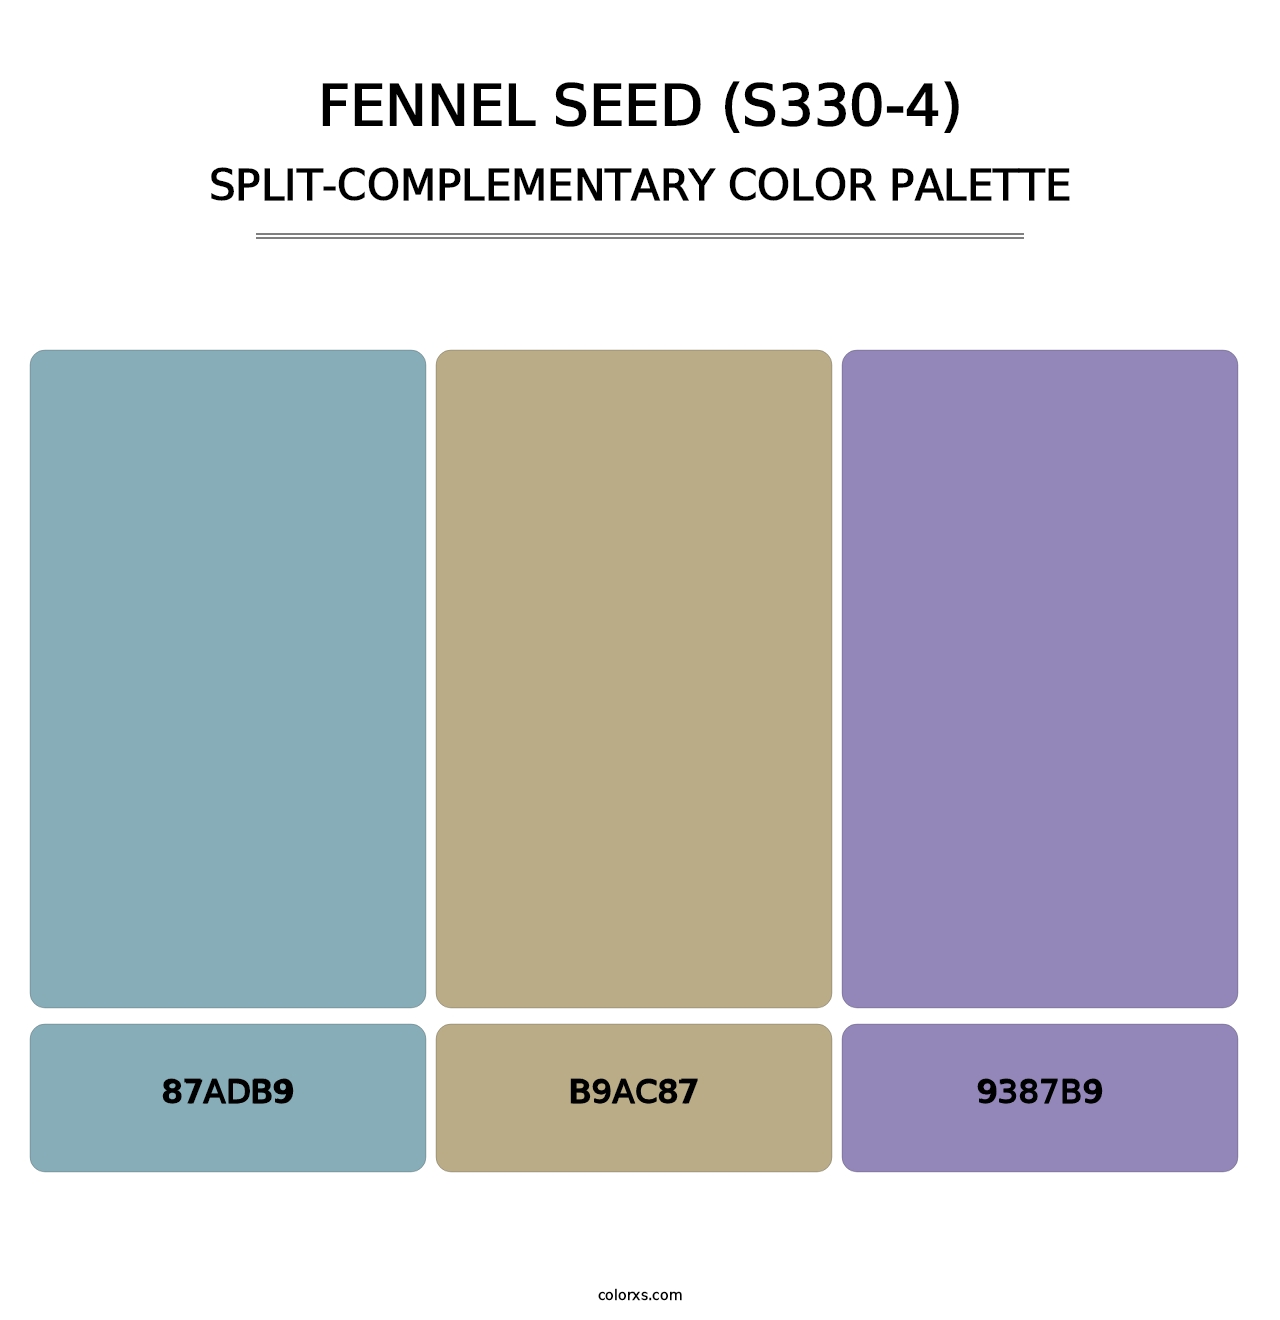 Fennel Seed (S330-4) - Split-Complementary Color Palette